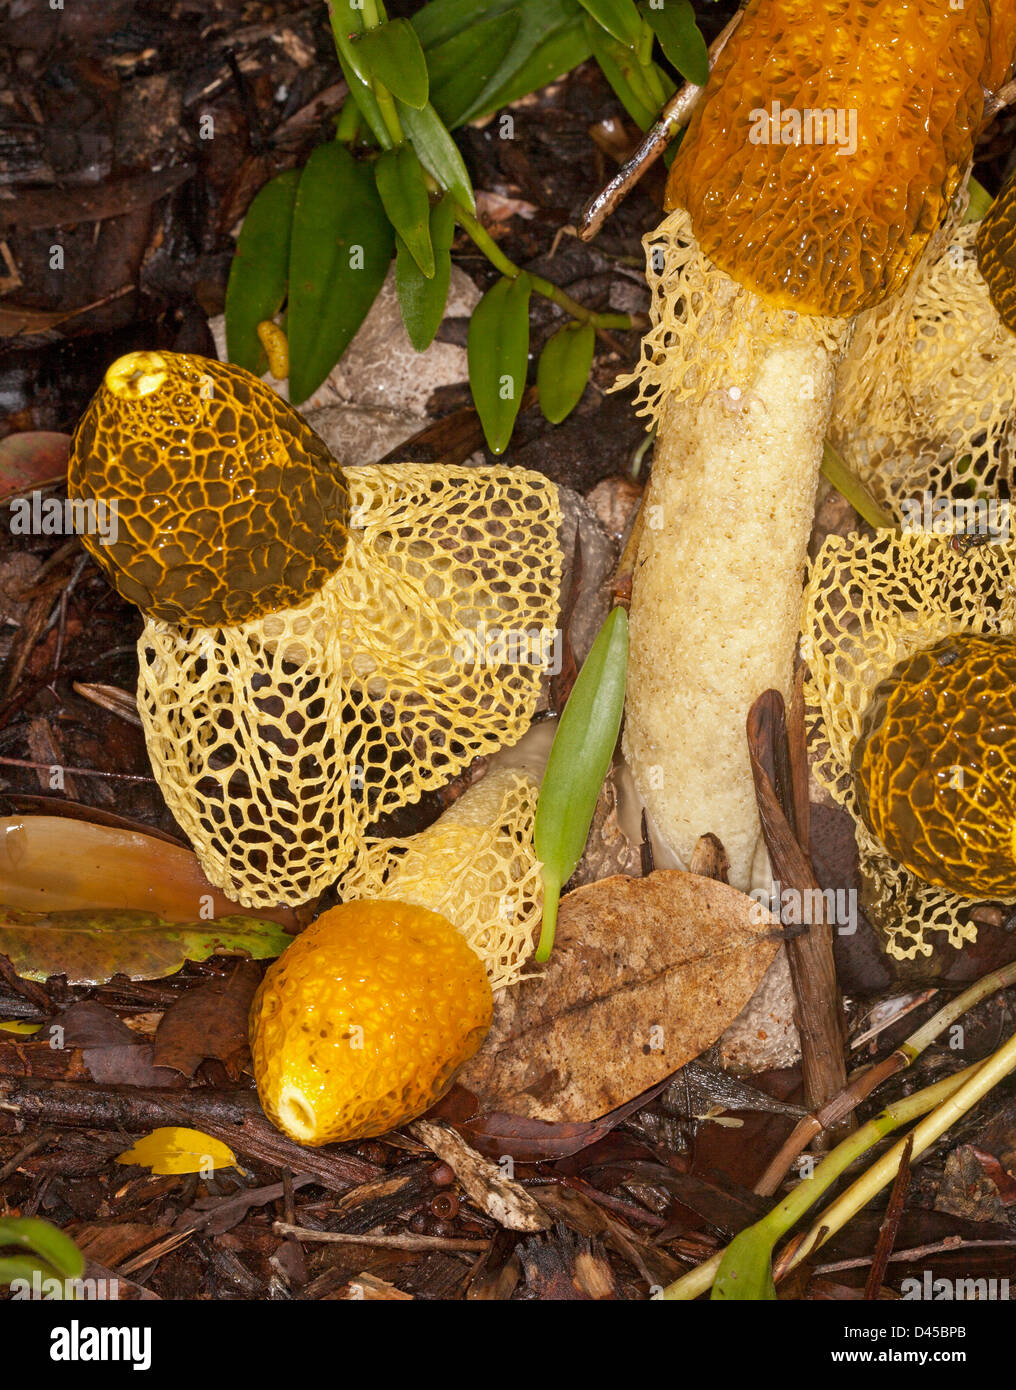 Cluster of orange fungi with lacy 'skirts' - Phallus multicolor -  stinkhorn fungus among fallen leaves on forest floor Stock Photo